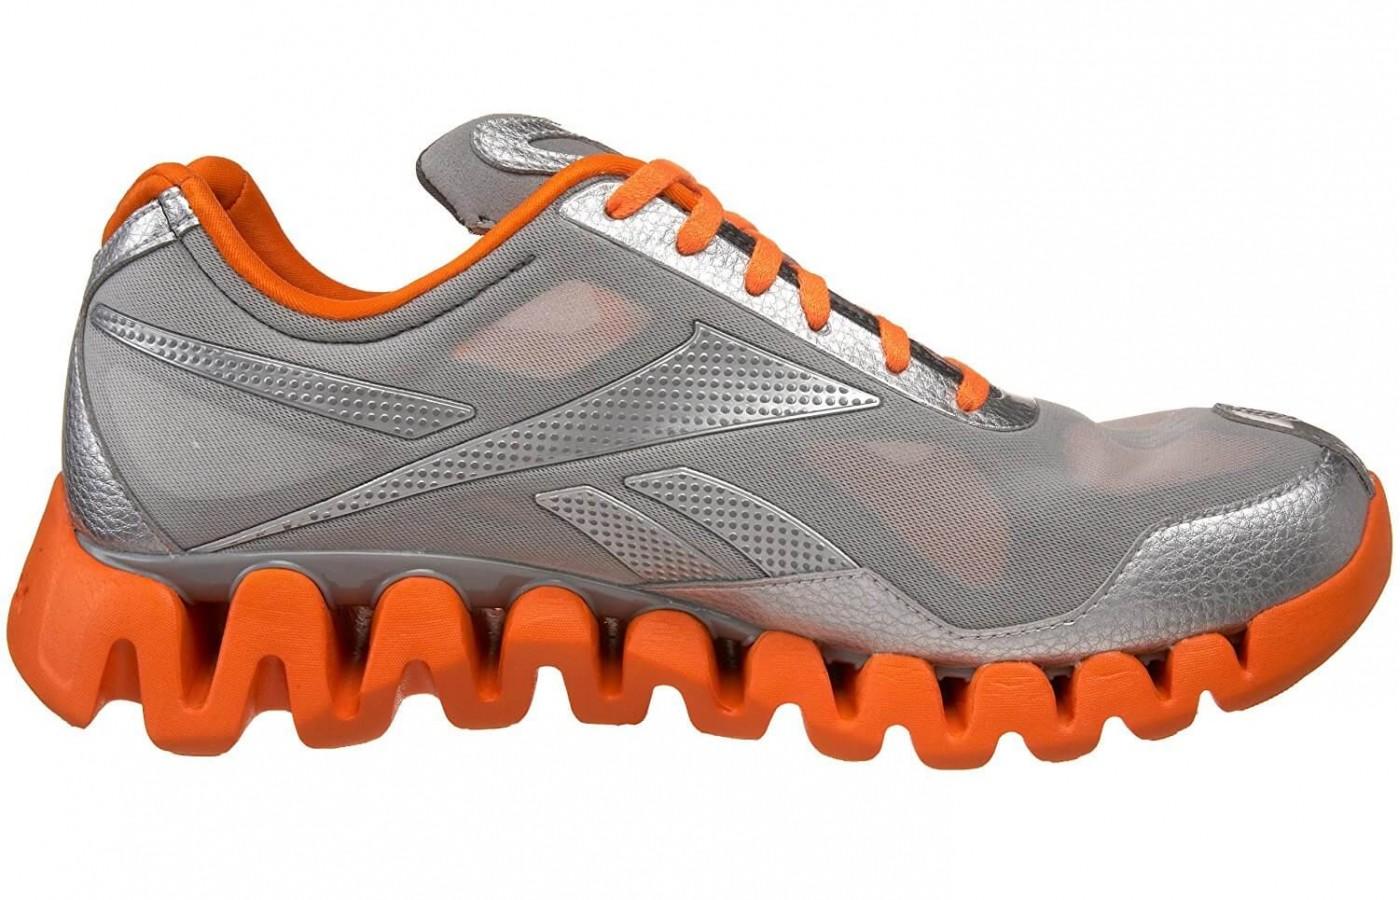 the low-cut profile of the Reebok Zig Pulse allows for maximum motion control and a freedom of movement